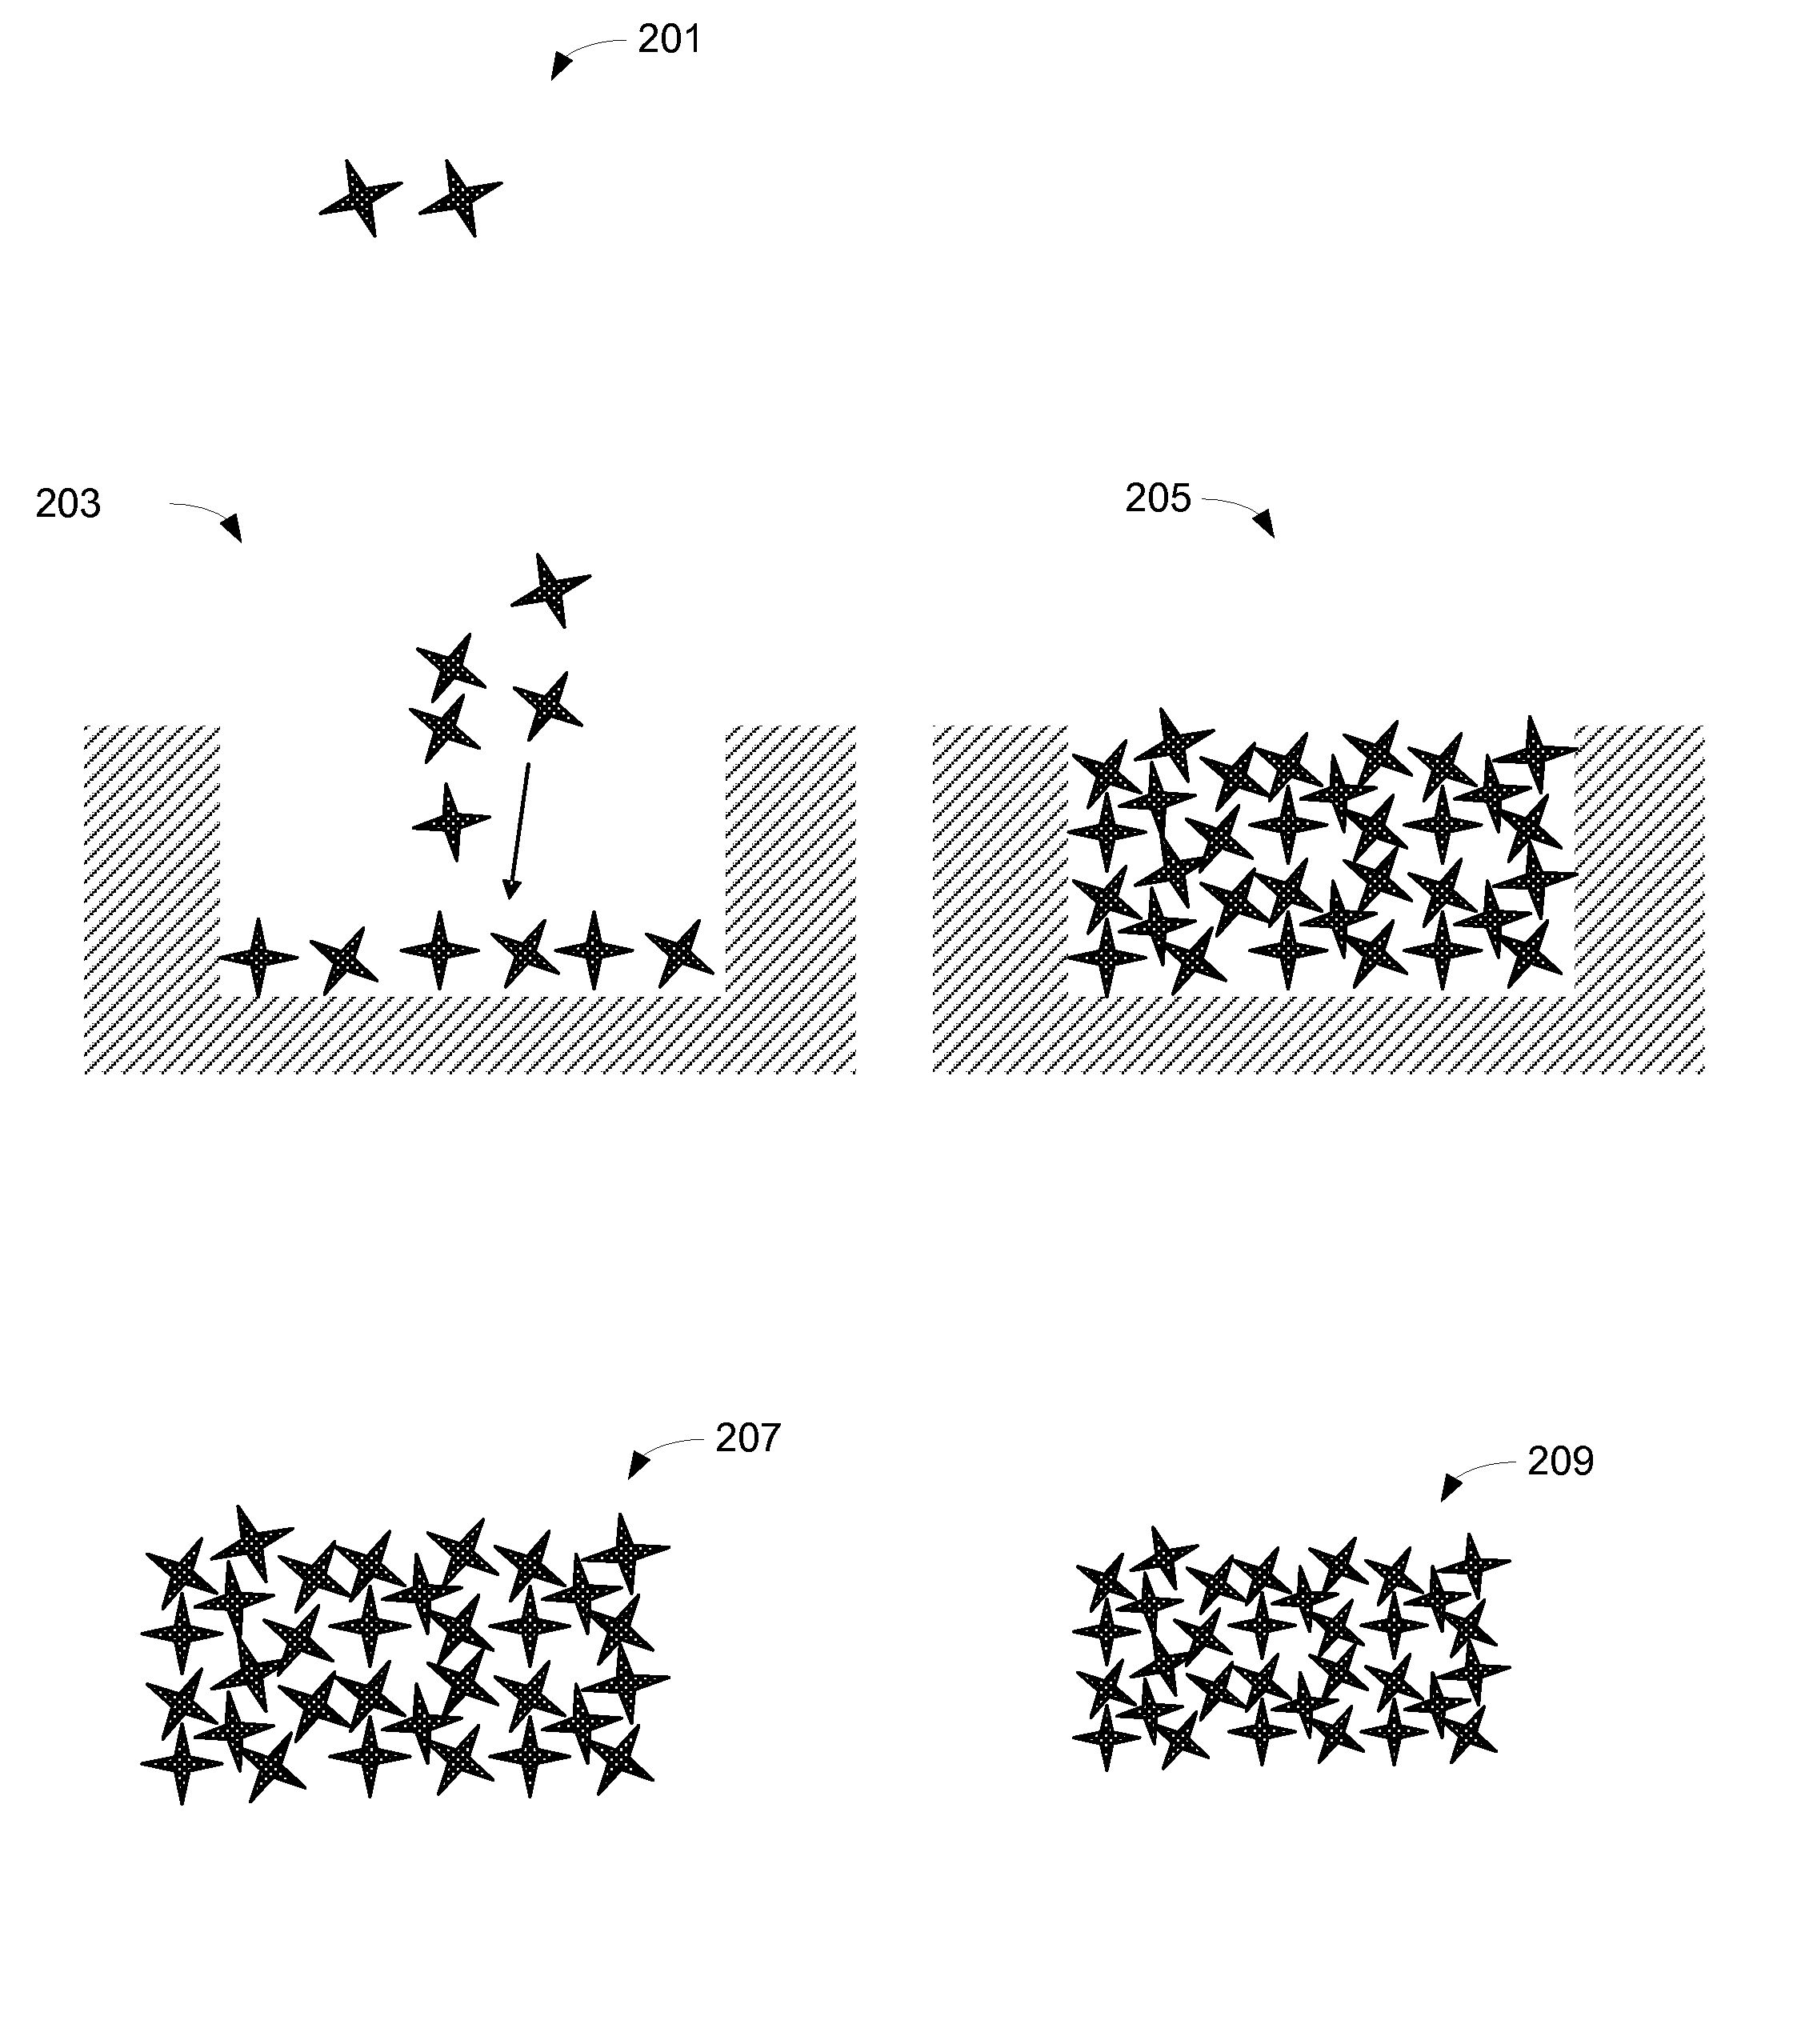 Sintered porous structure and method of making same